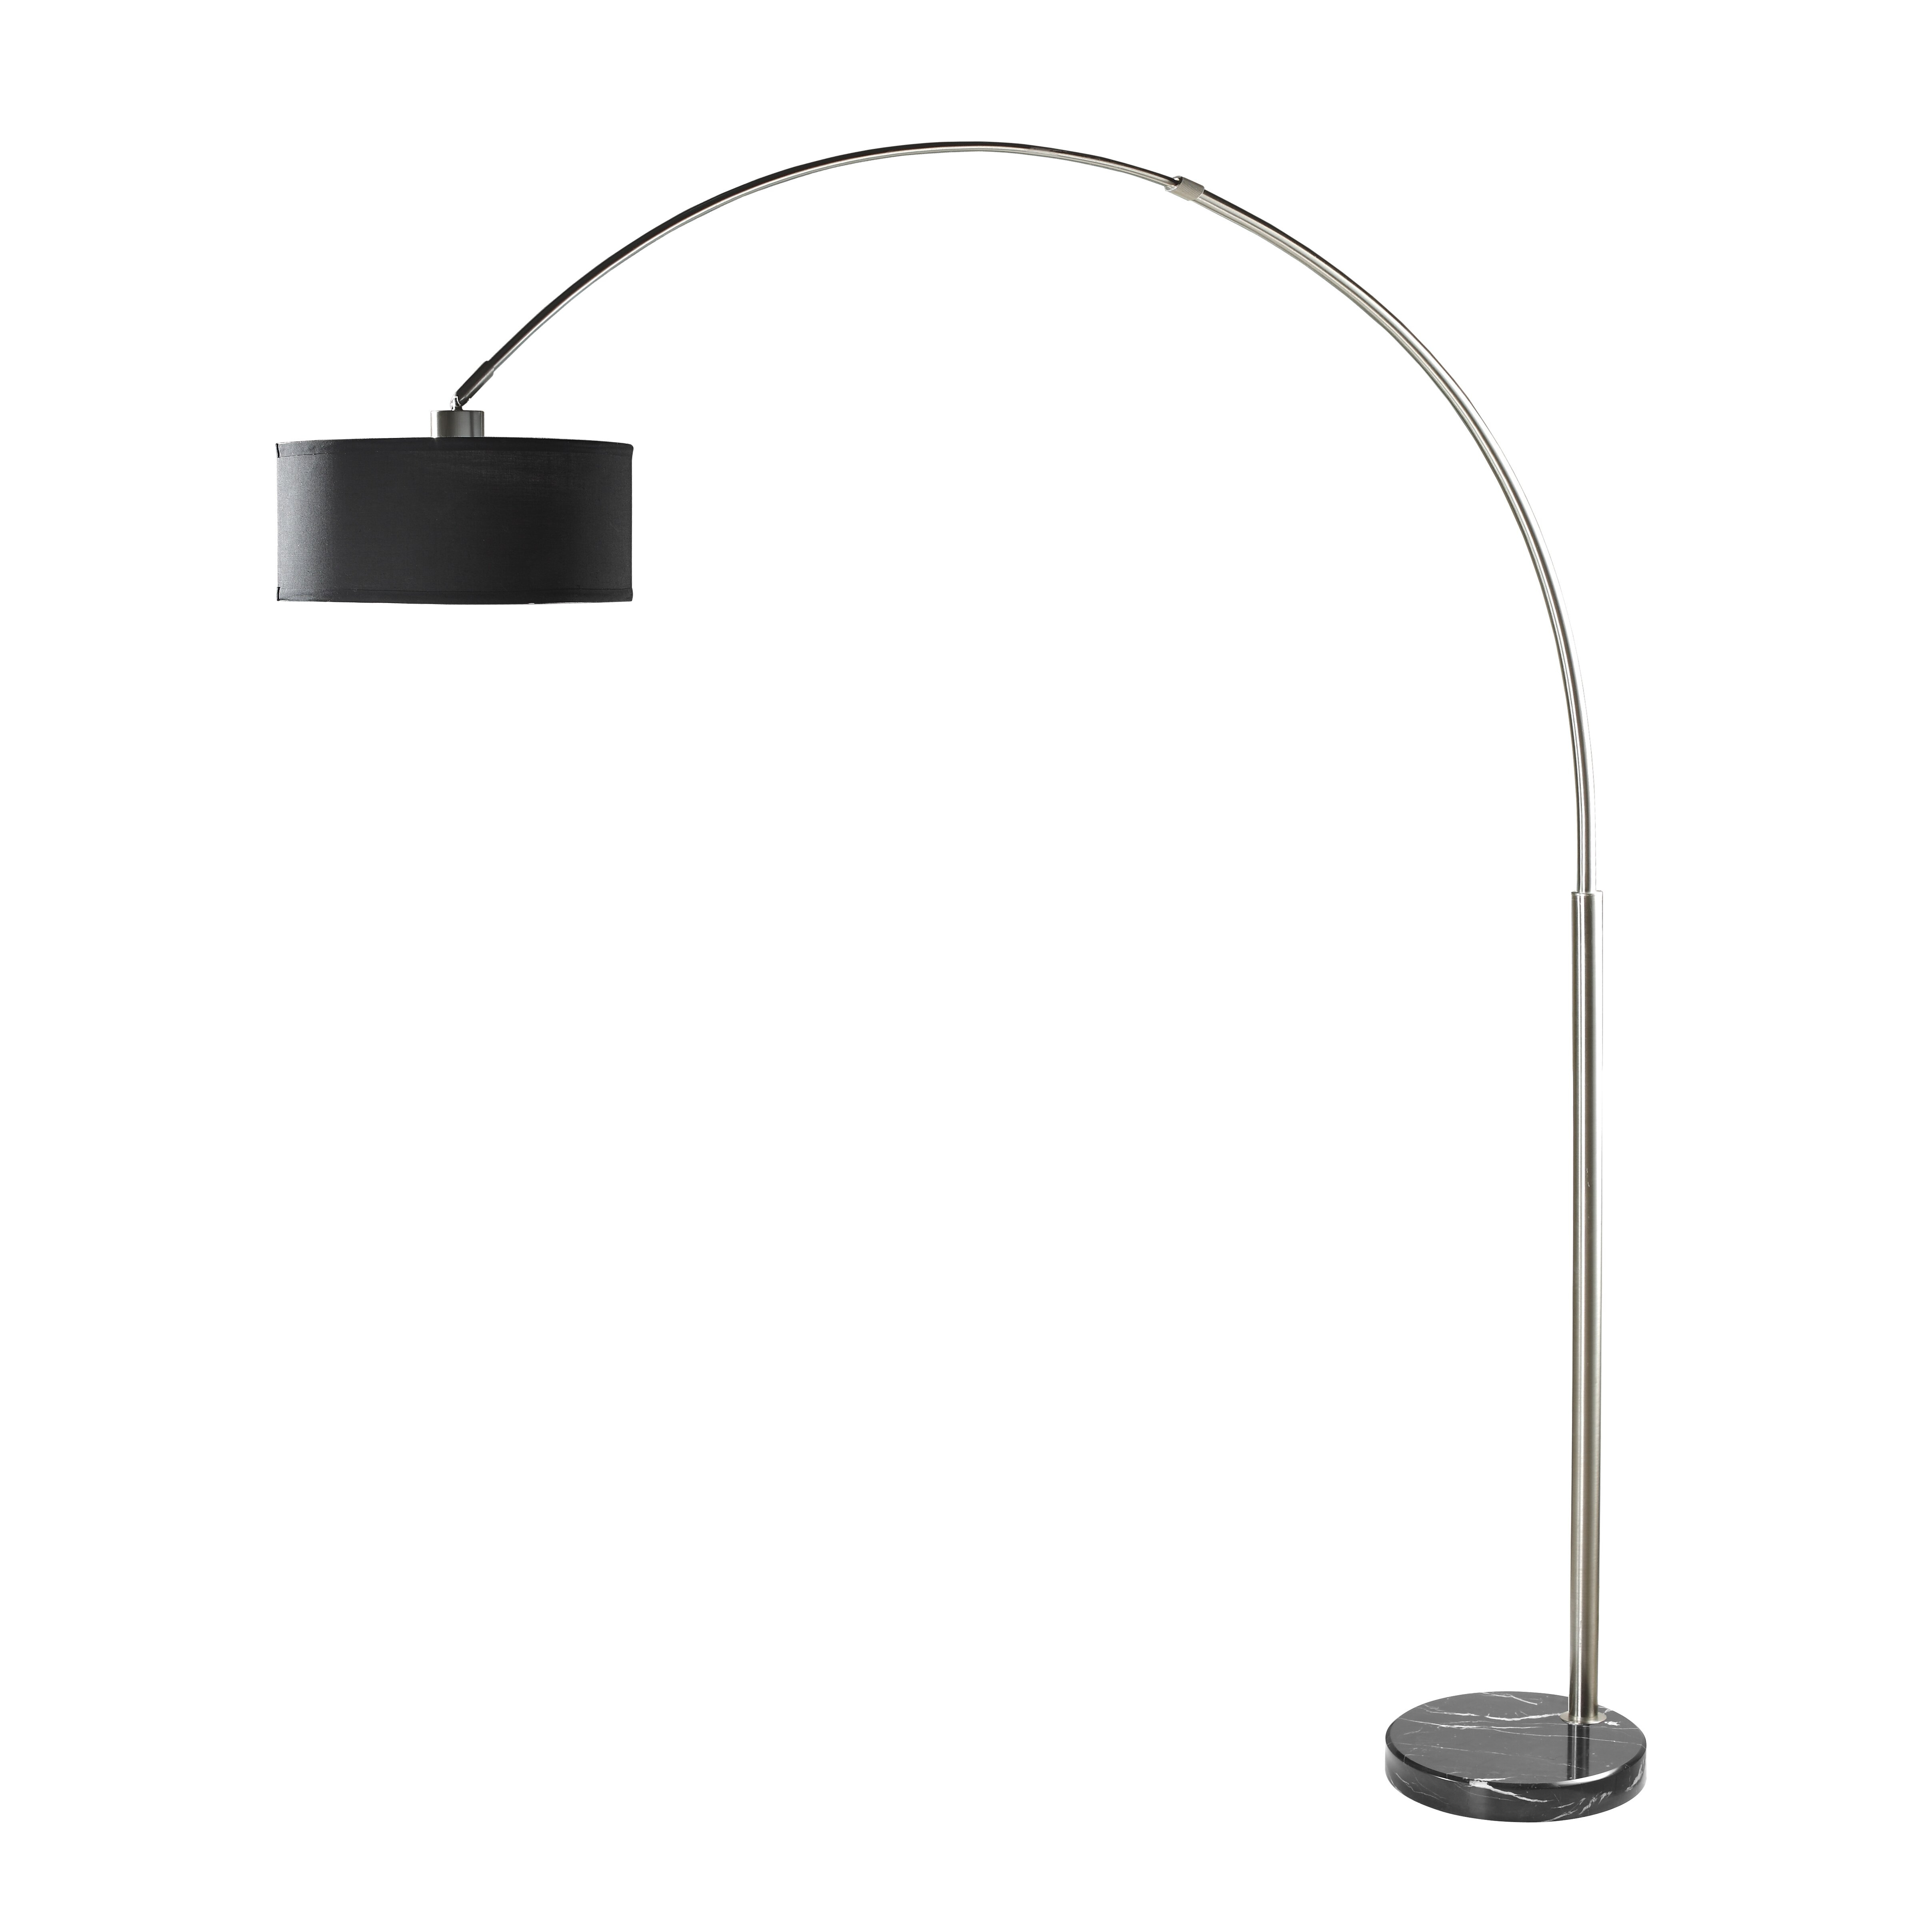 Langley Street Maui 81 Arched Floor Lamp Reviews Wayfair with regard to measurements 4830 X 4830